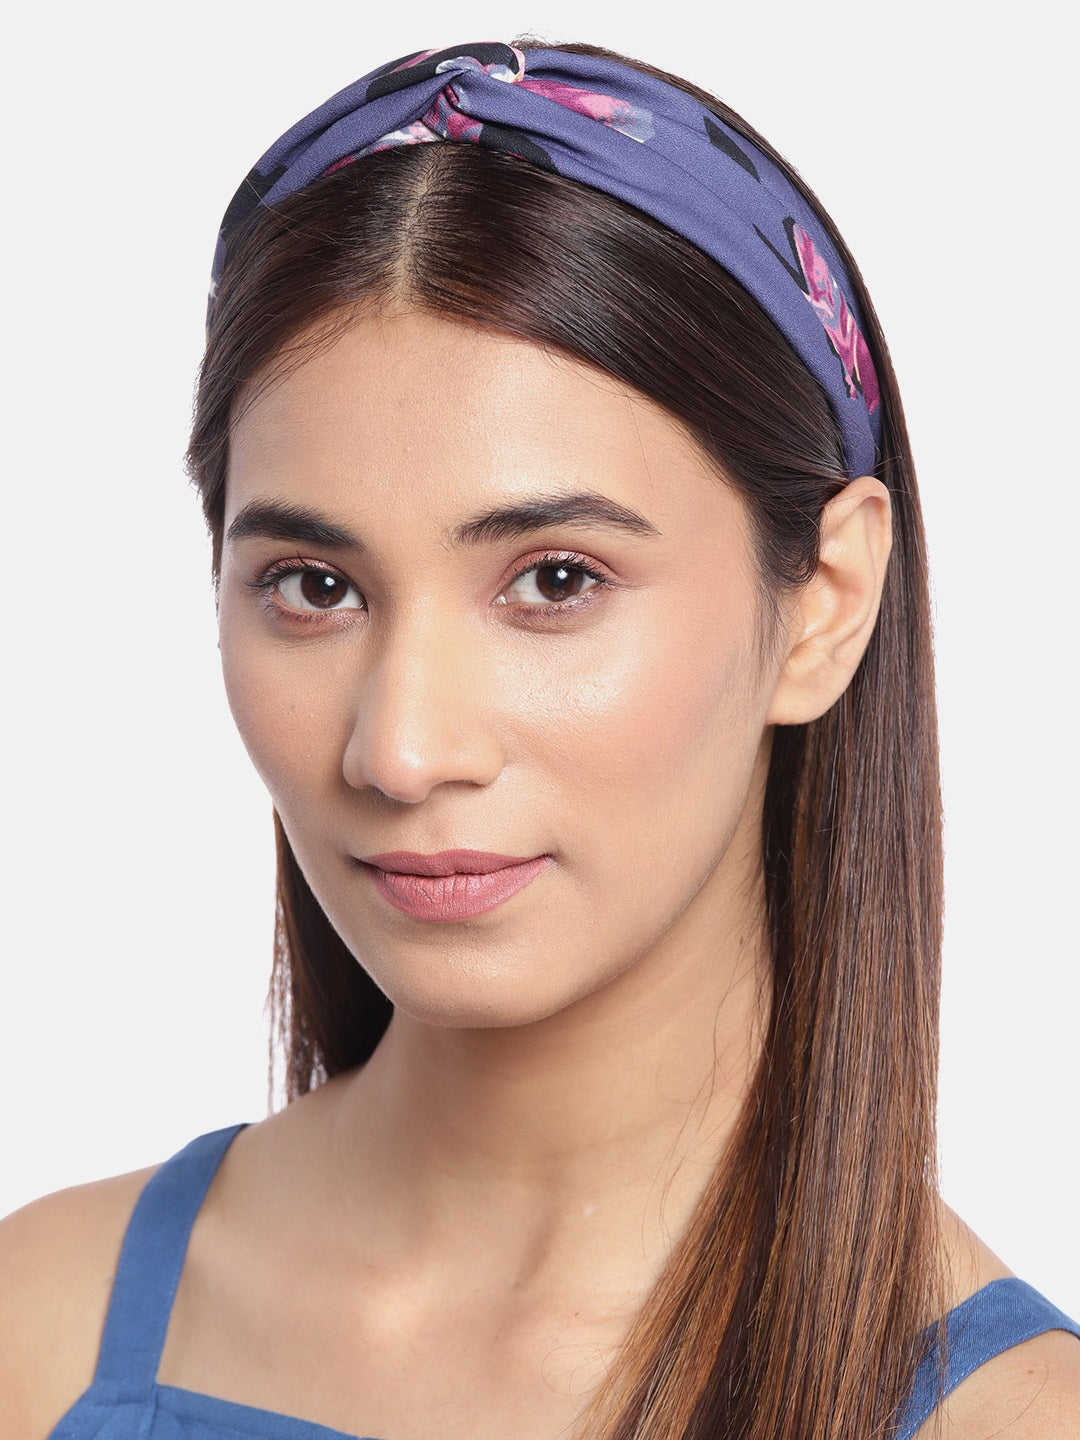 Blueberry multi floral printed blue knot hairband